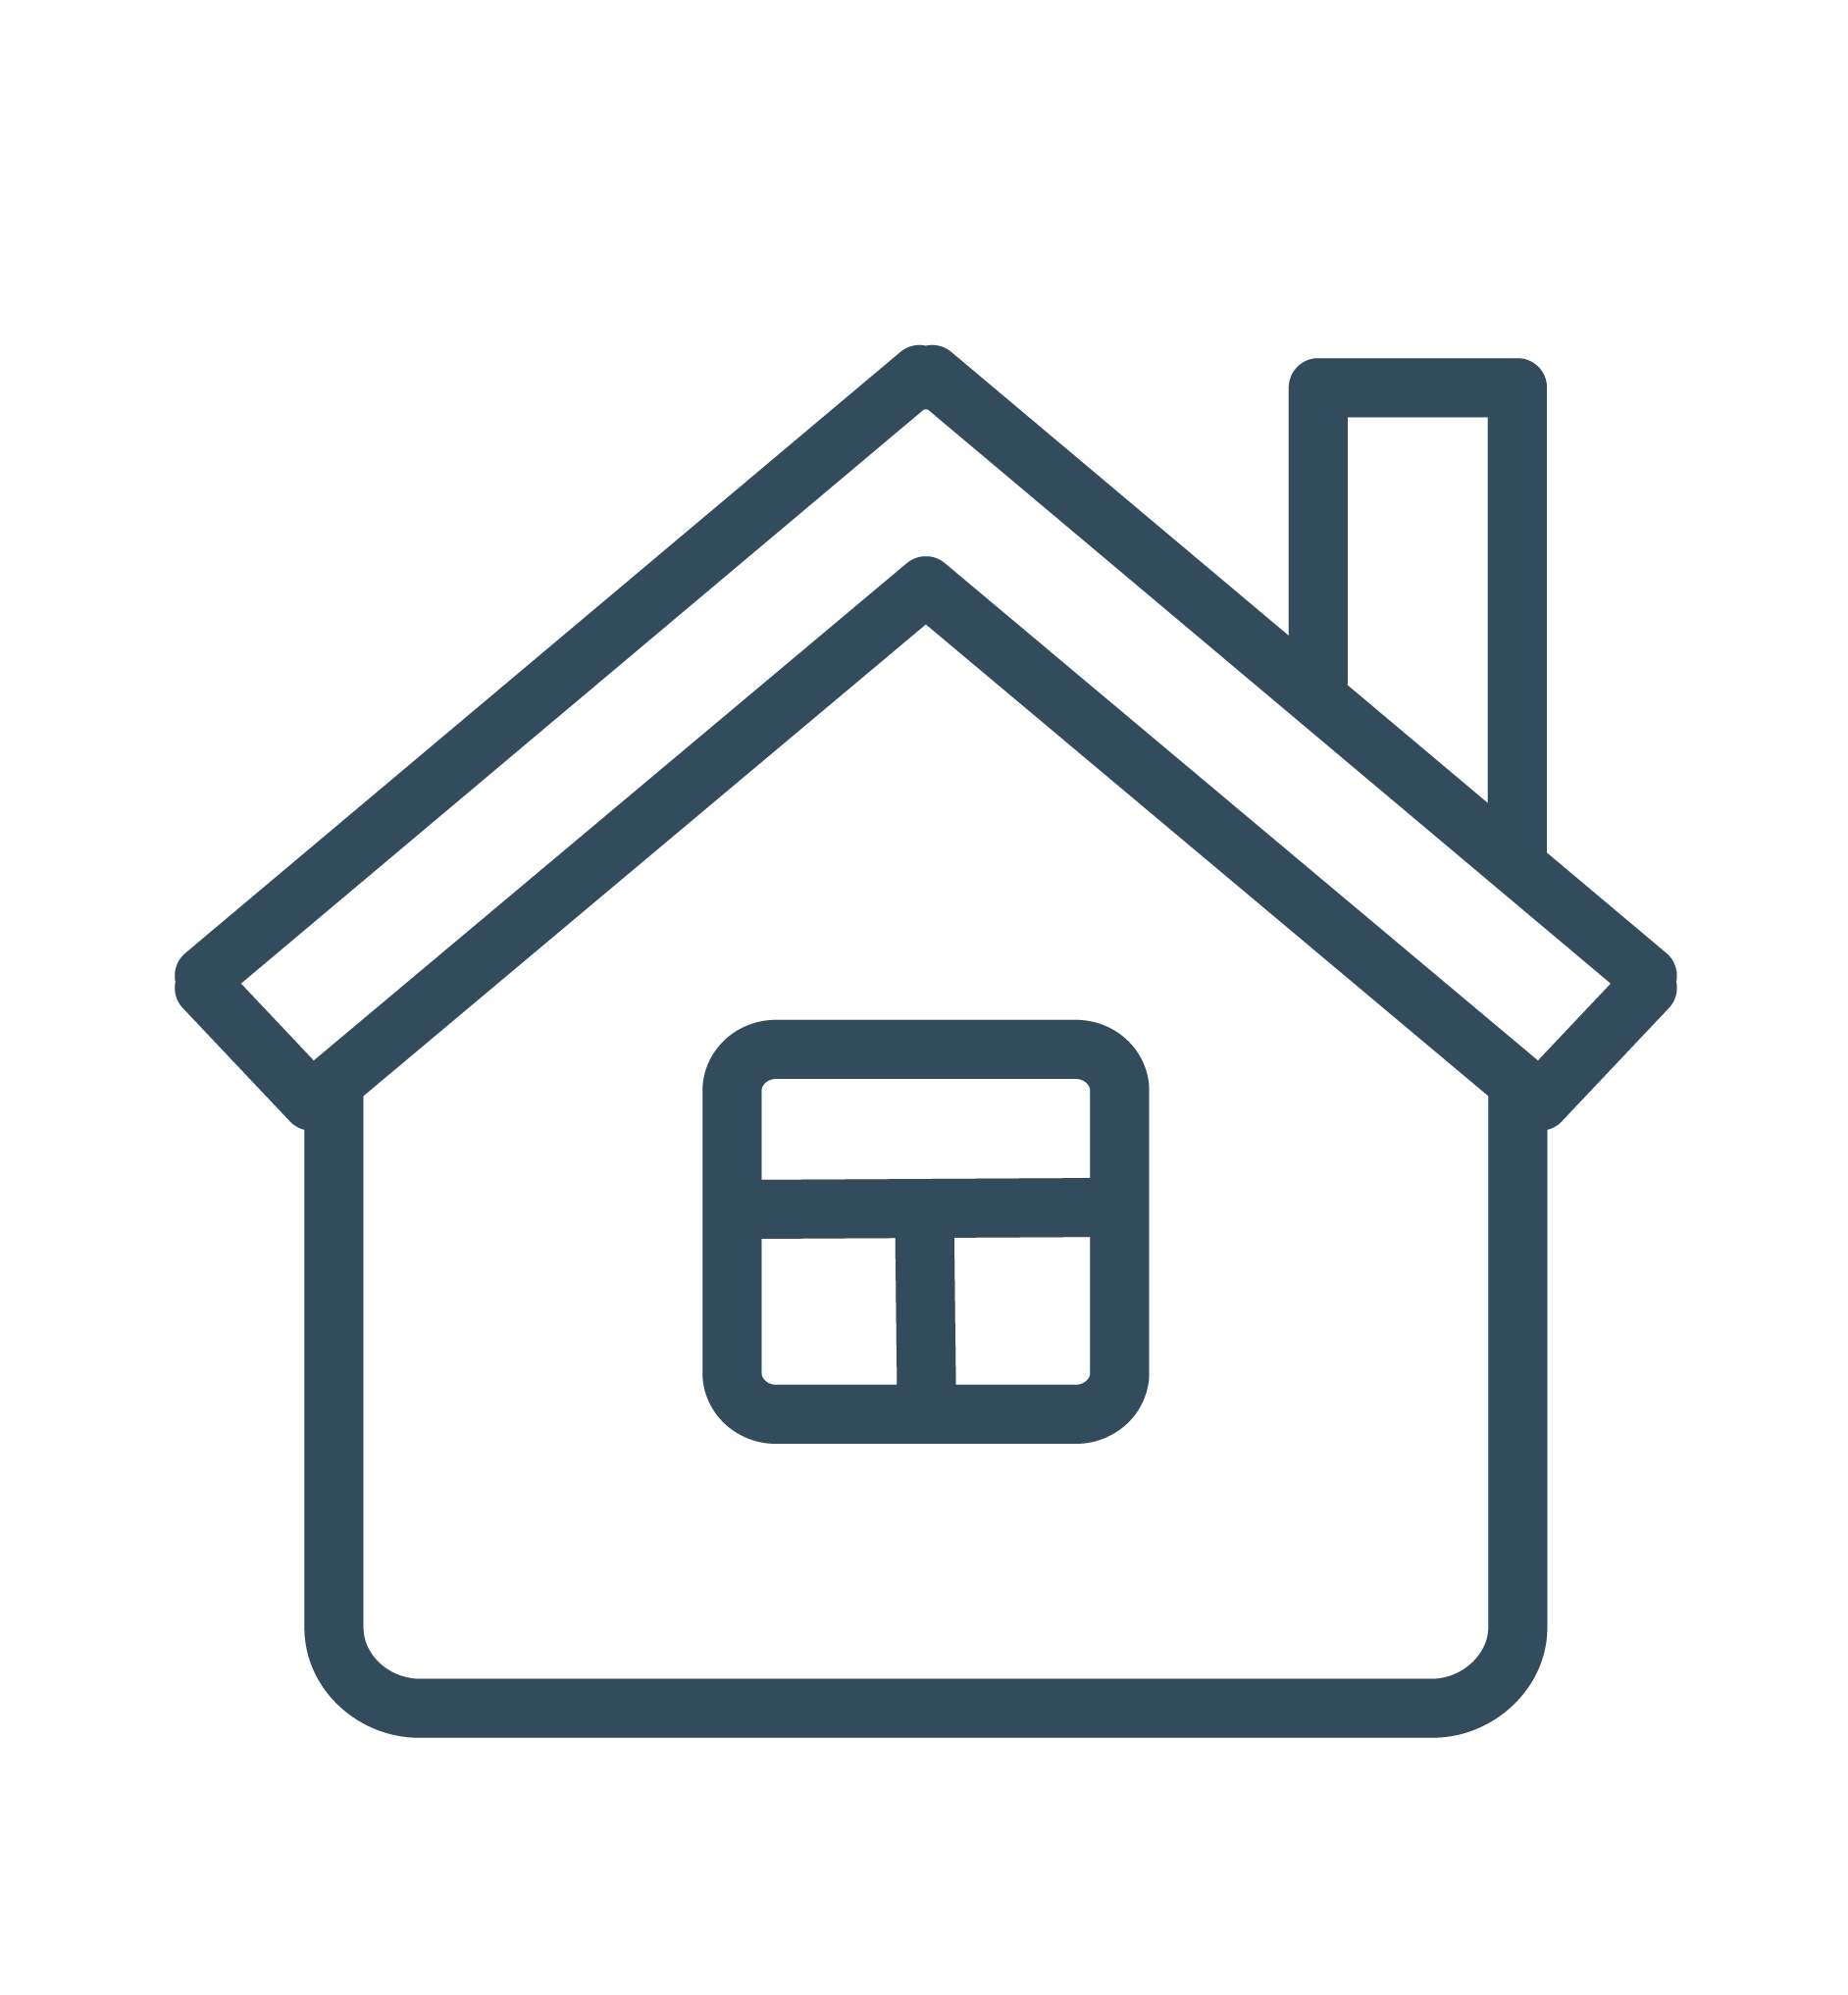 Increase Mortgage Payments icon